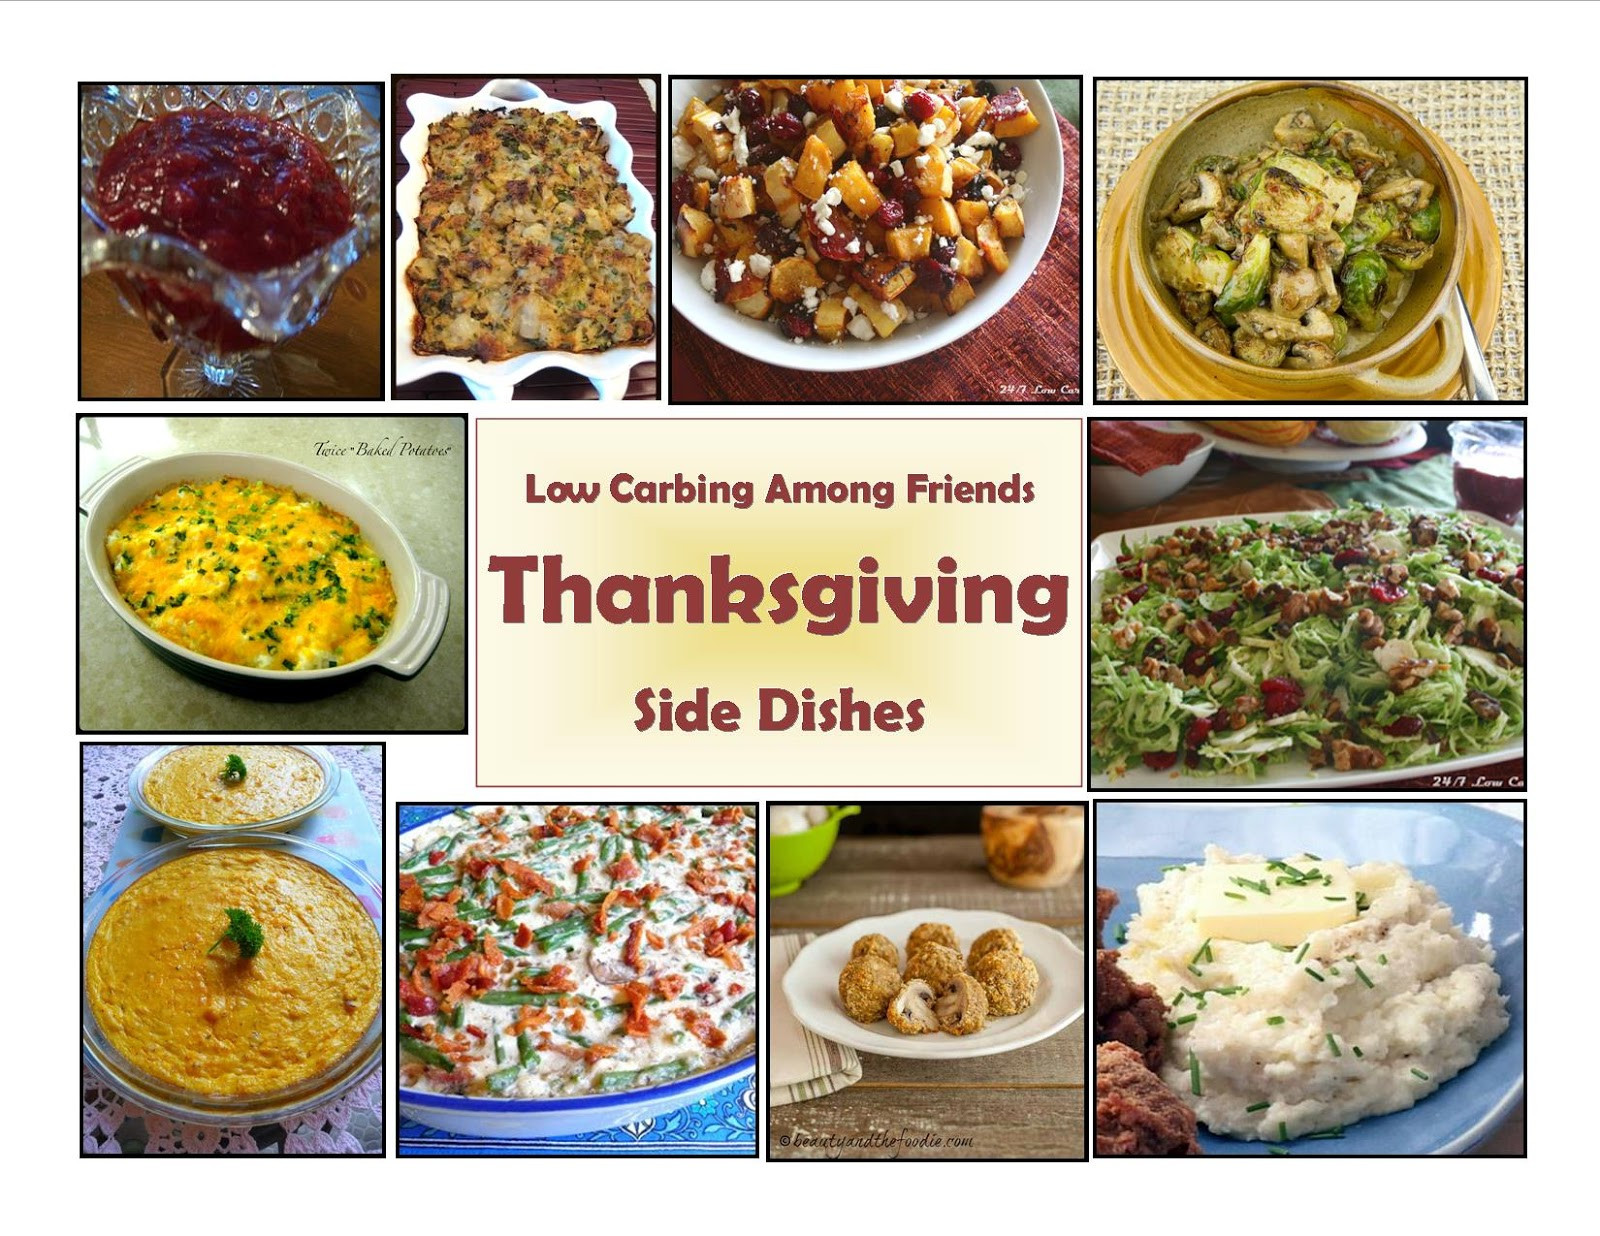 Low Carb Thanksgiving Side Dishes
 24 7 Low Carb Diner Thanksgiving Sides Round Up